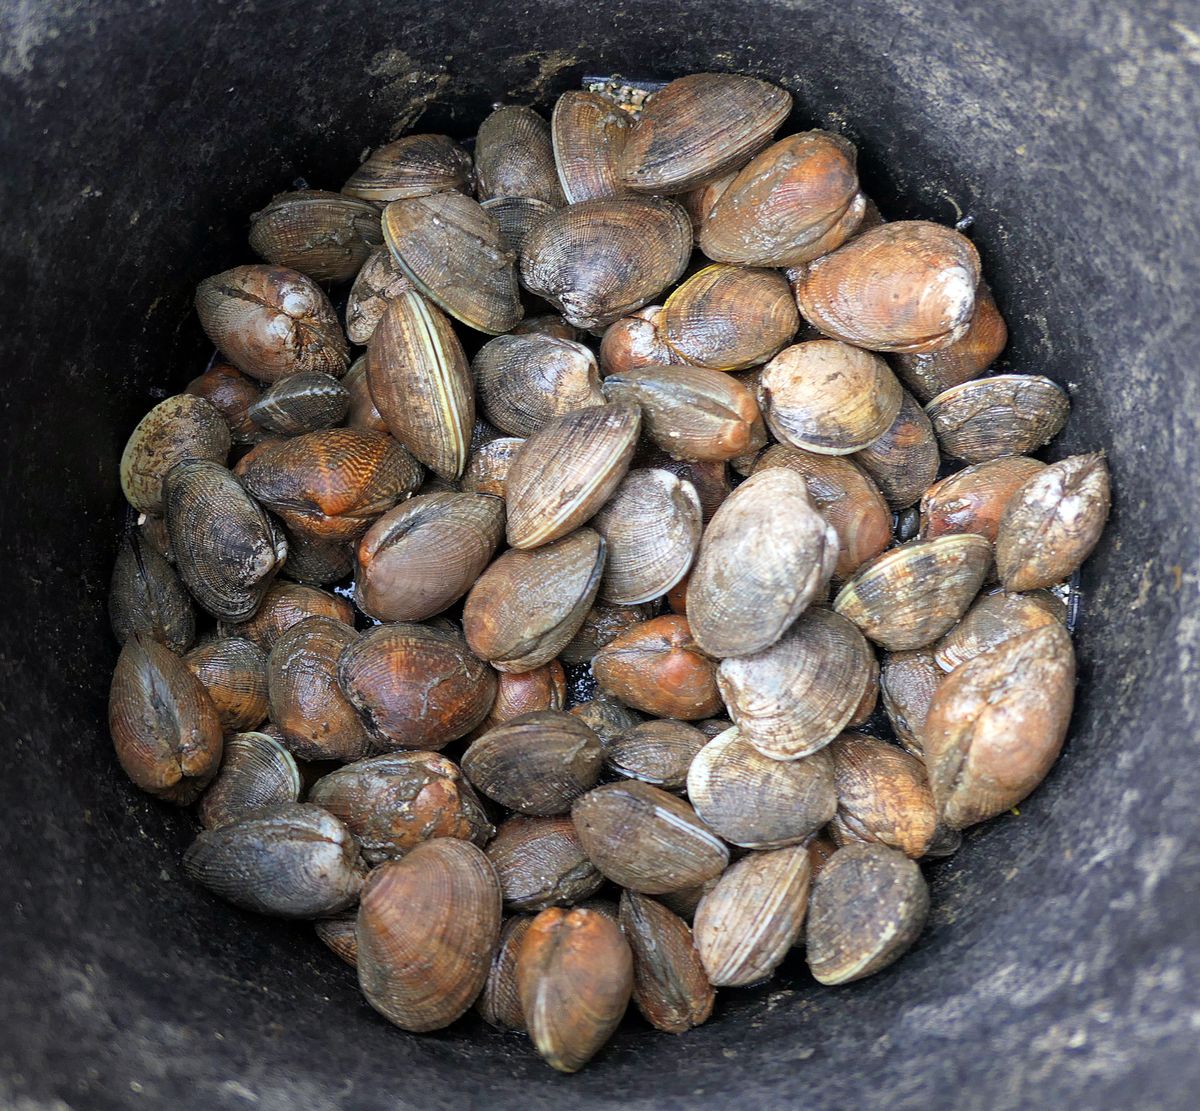 Fresh clams are harvested and sit in a bucket, waiting to be cooked by campfire at Emerald Acres Oysters, a Hipcamp destination in the South Puget Sound. (John Nelson)